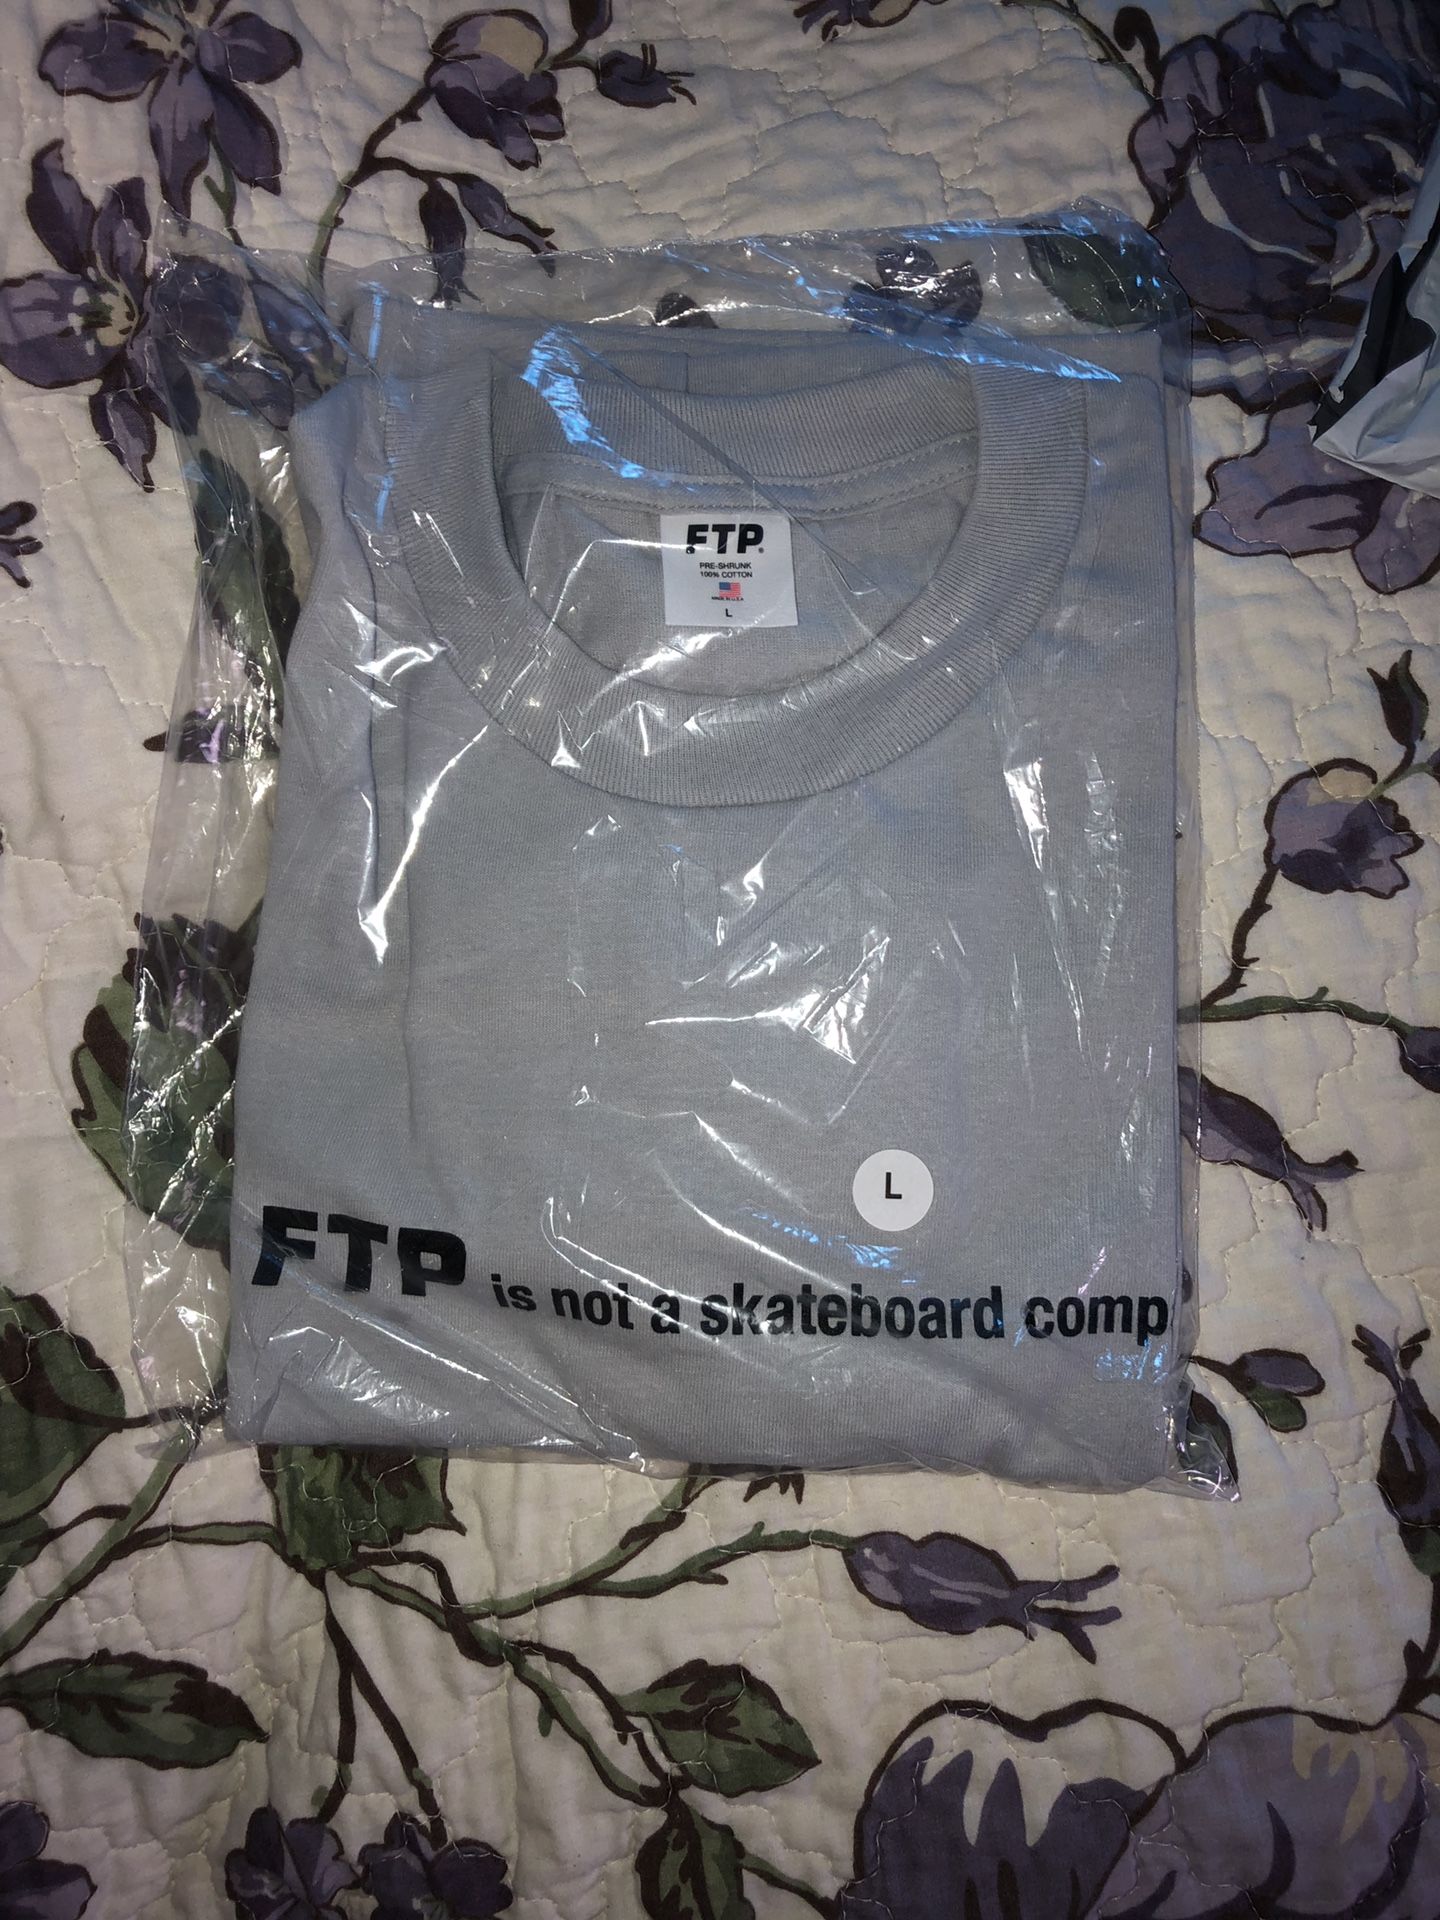 FTP is not a skateboard company tee